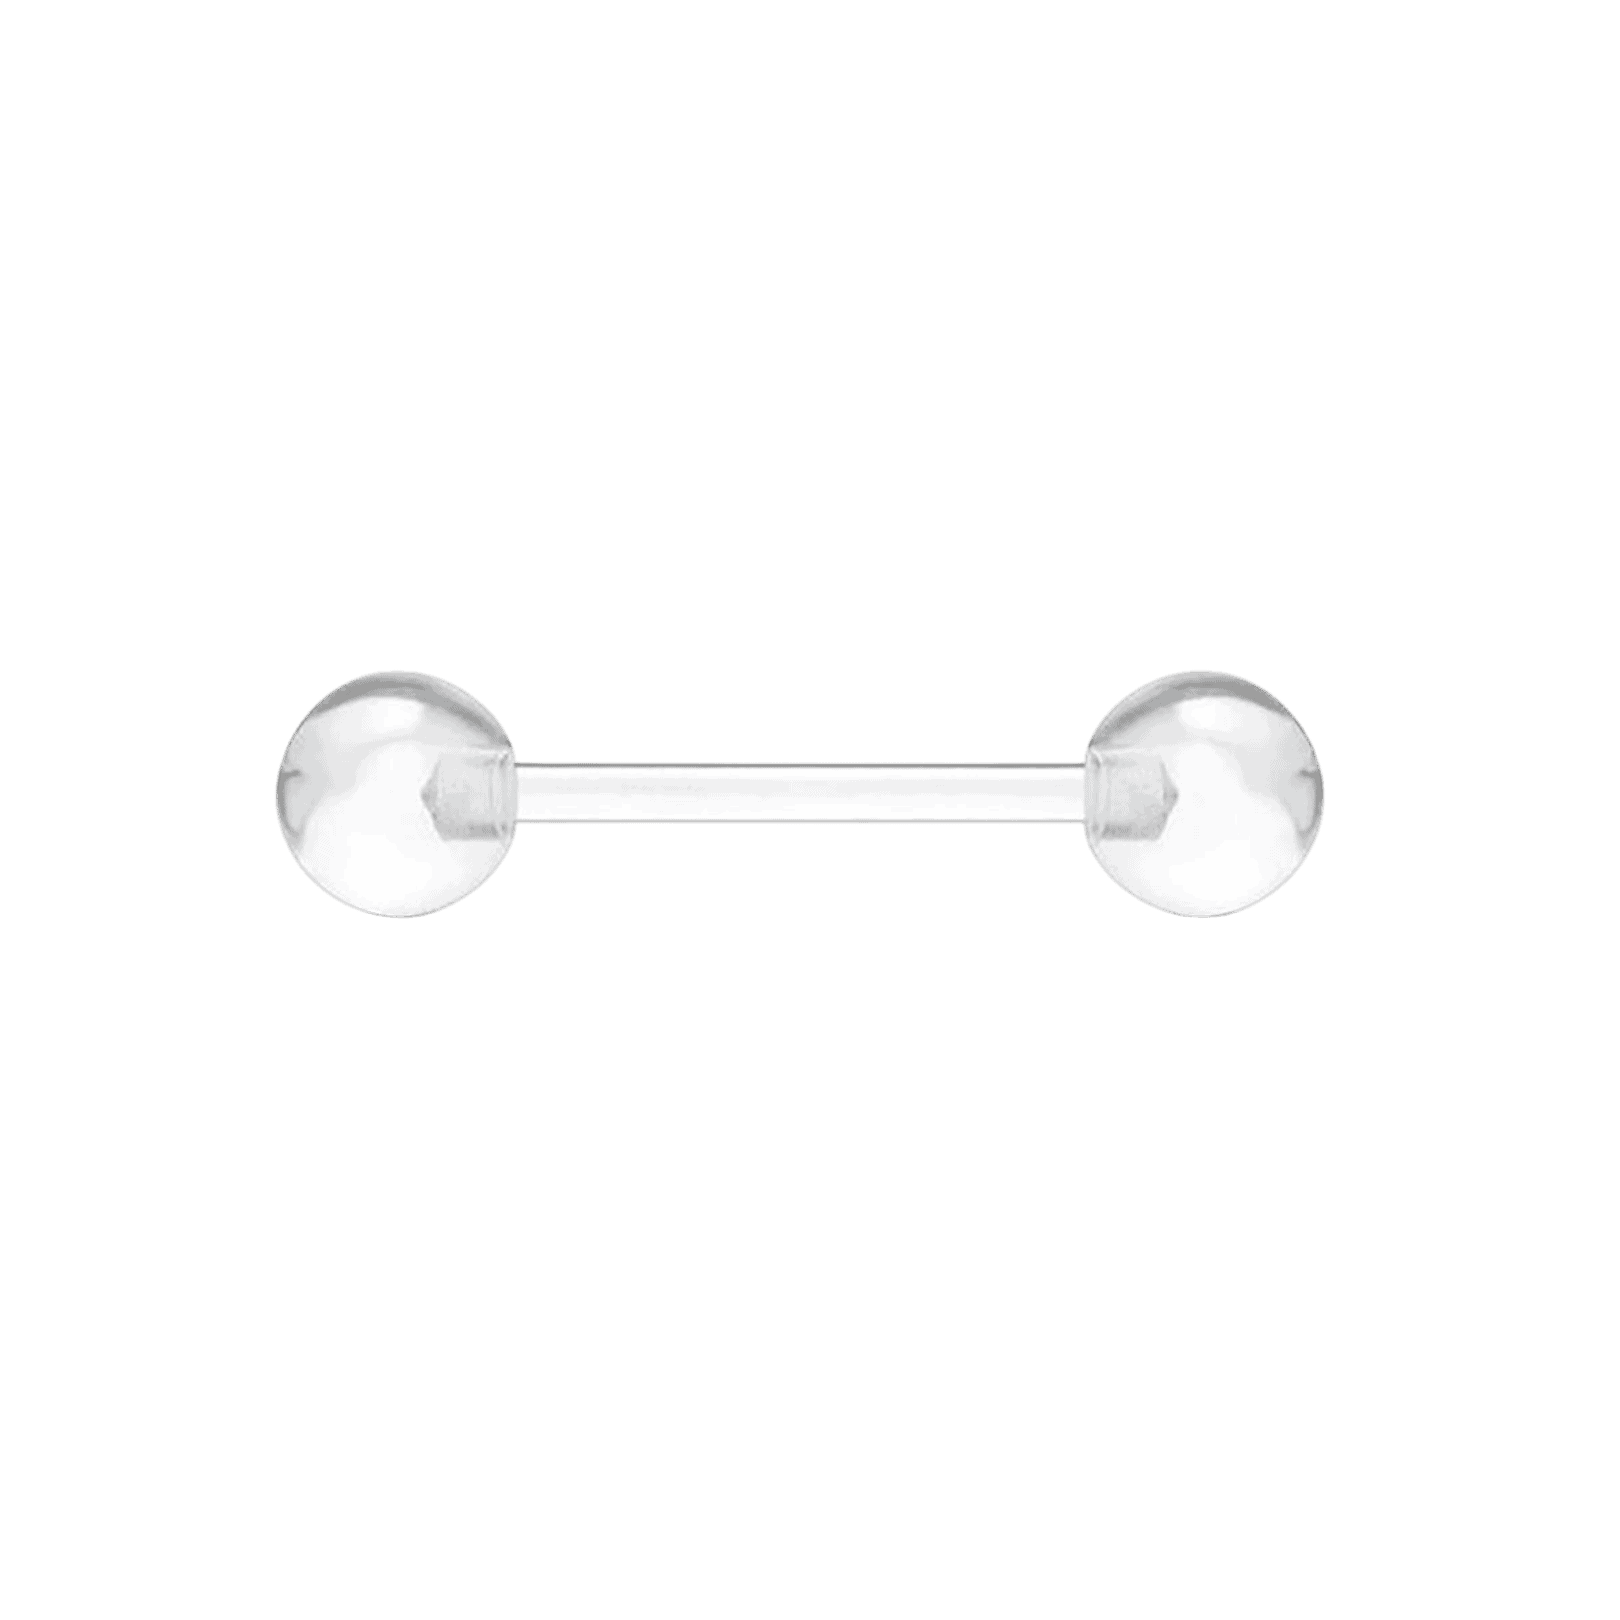 tongue and nipple piercing jewelry silicon plastic barbell